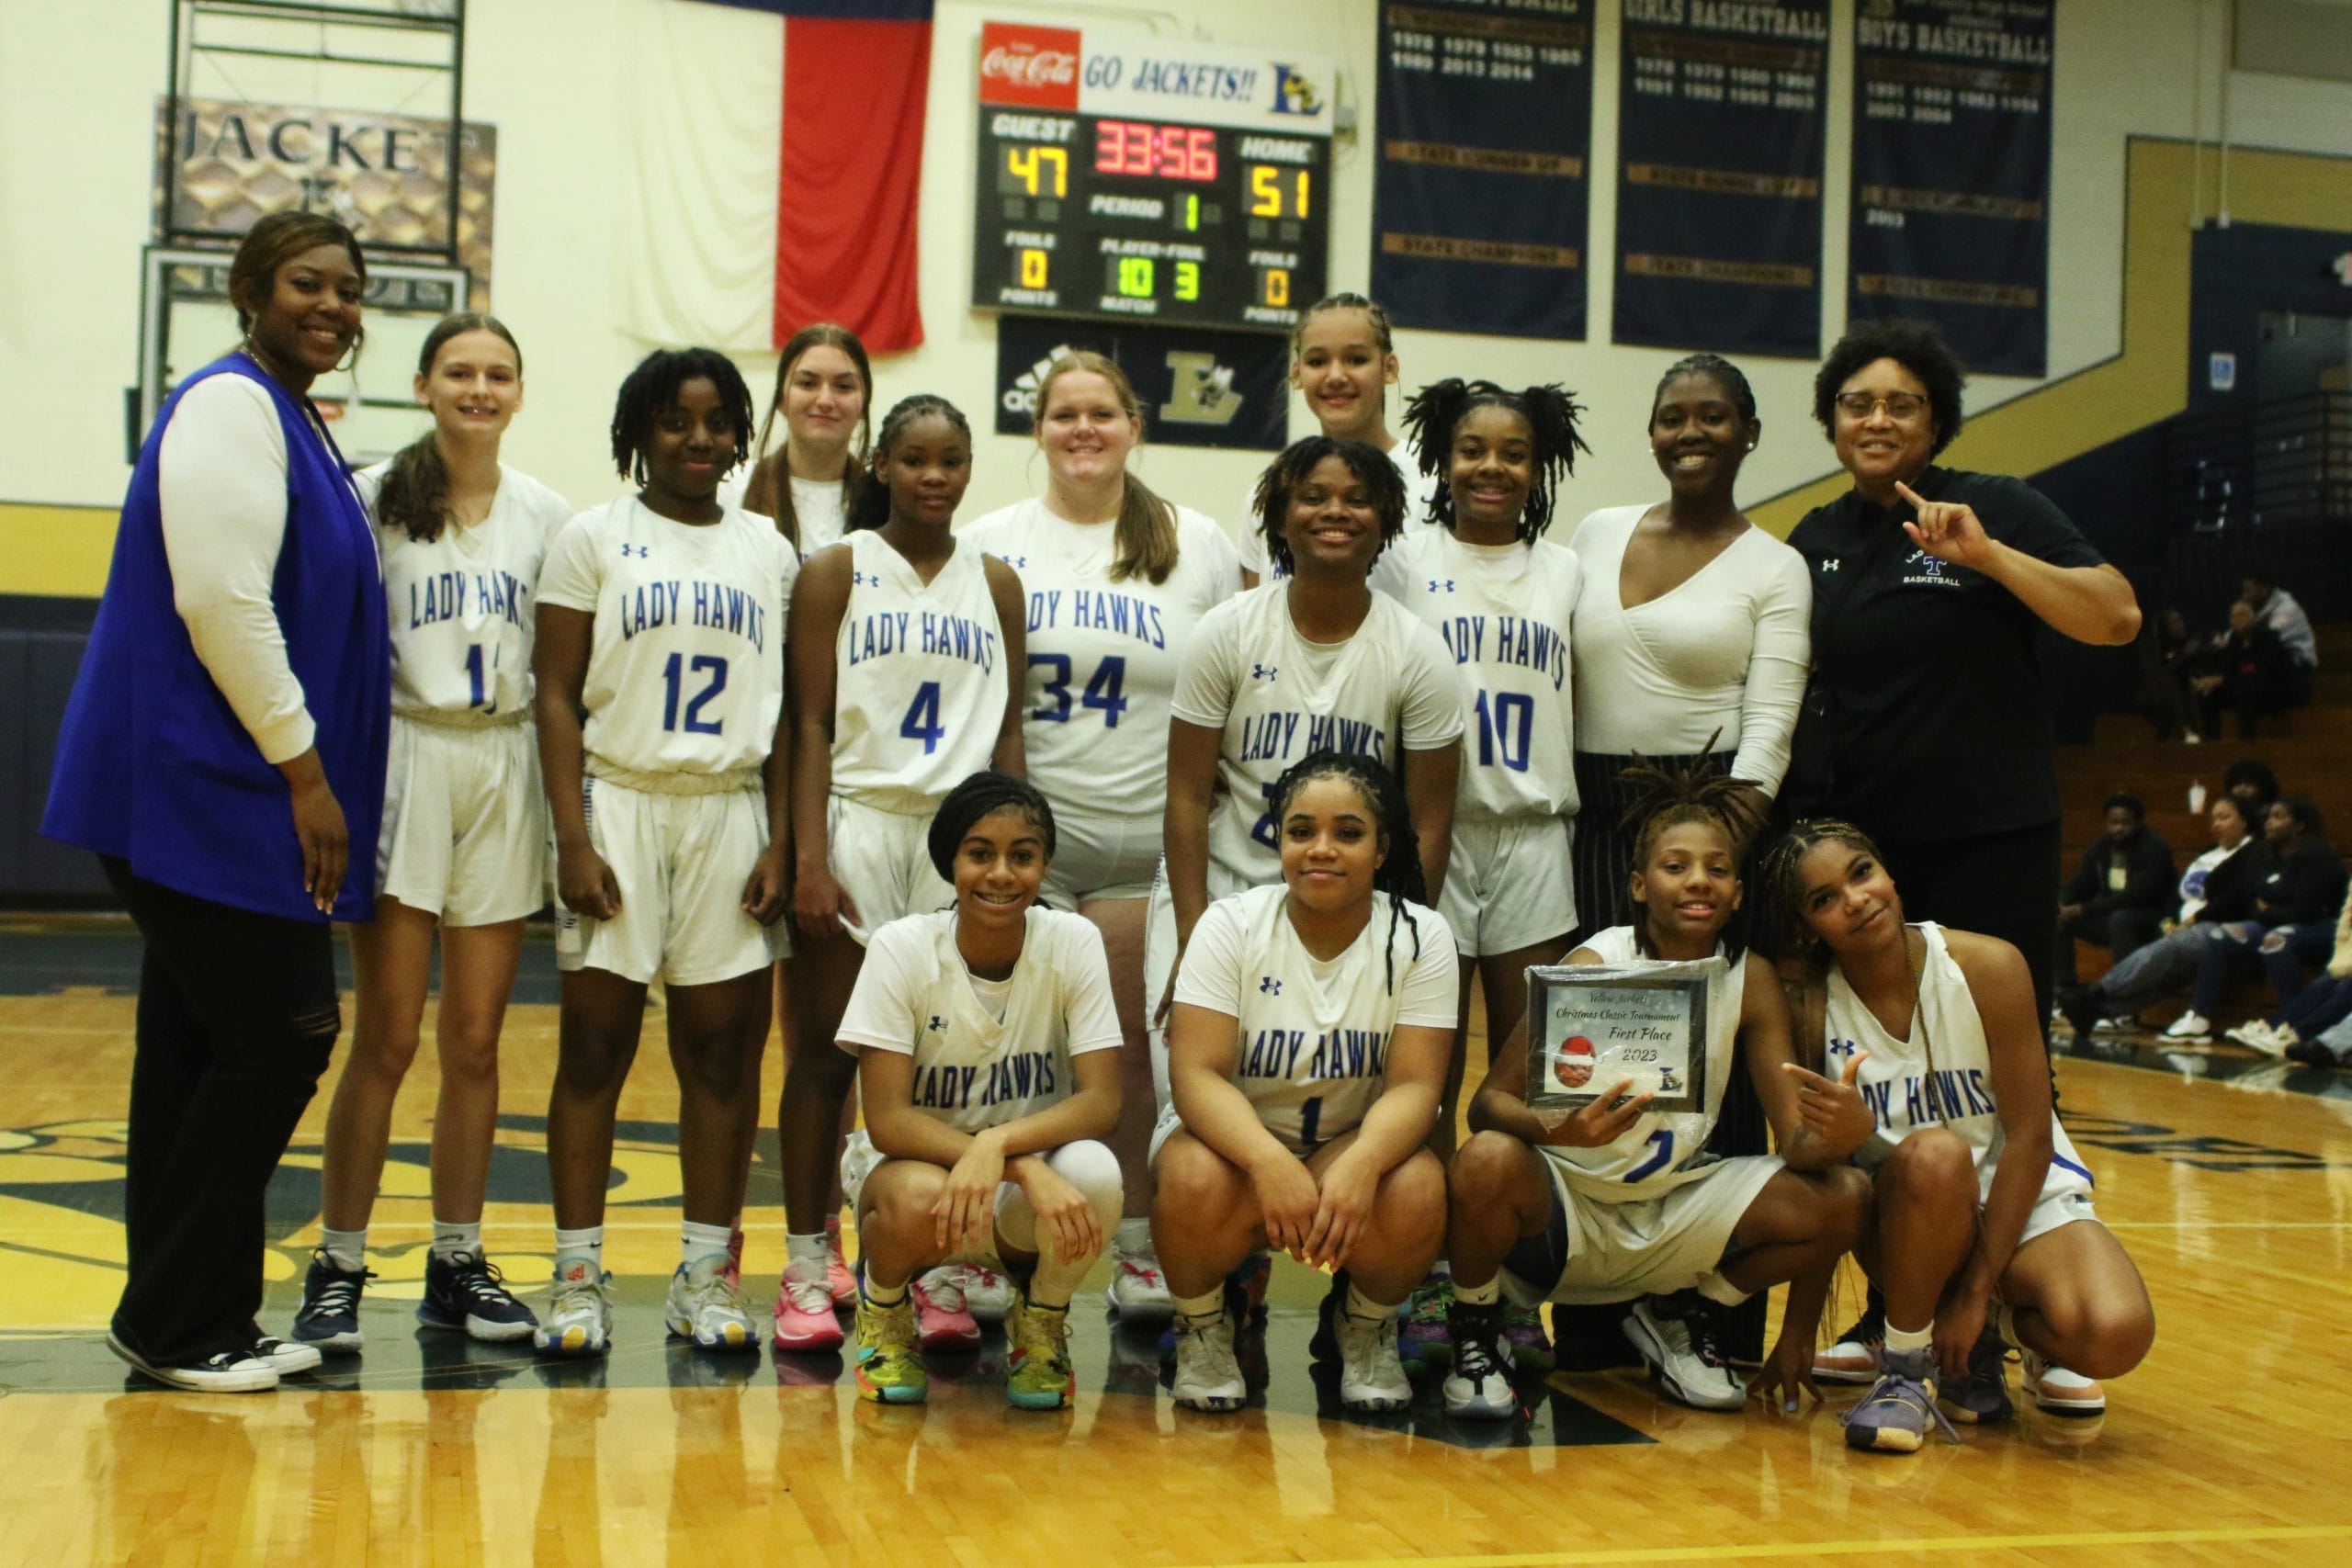 Lady Hawks capture Jacket Classic against Overhills, Hoke boys rally past Triton in championship game